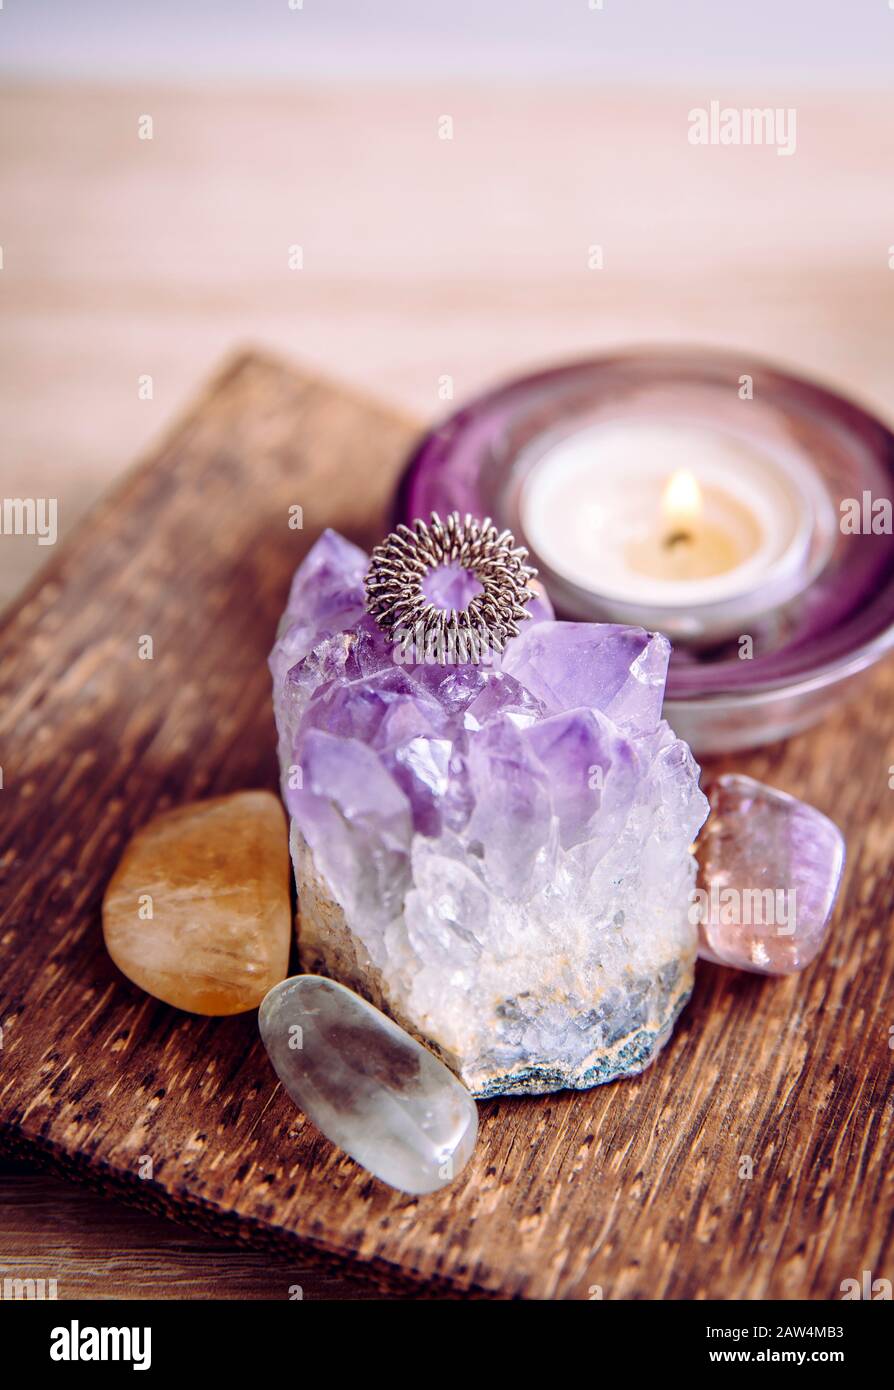 Acupressure massage ring on amethyst crystal cluster. Acupressure is an alternative medicine technique with physical pressure is applied to acupunctur Stock Photo